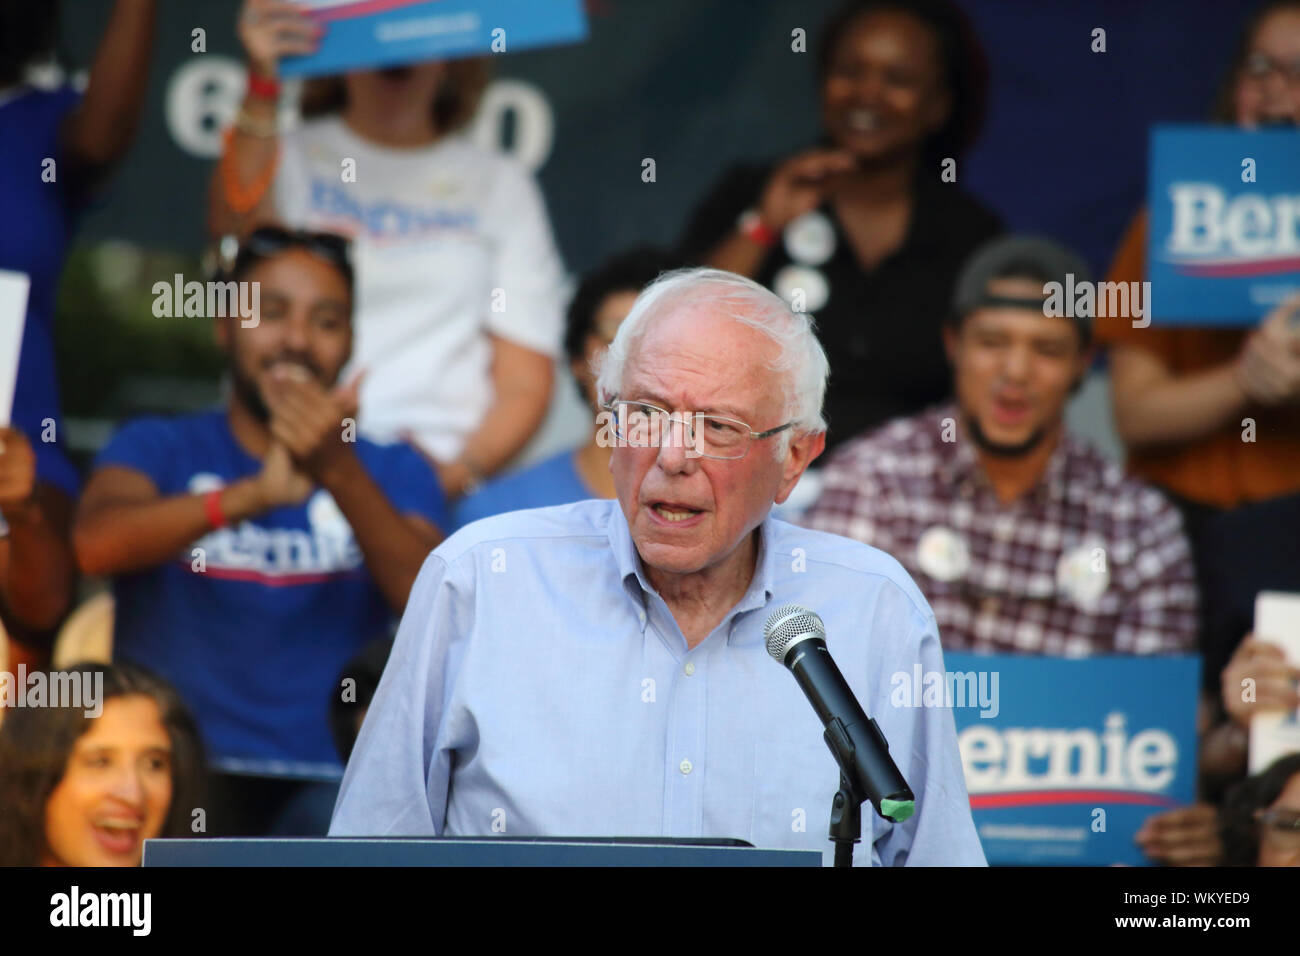 2020 Presidential candidate Bernie Sanders speaks on stage during his Climate Change Crisis Townhall at Chapin Park in Myrtle Beach, South Carolina on Stock Photo